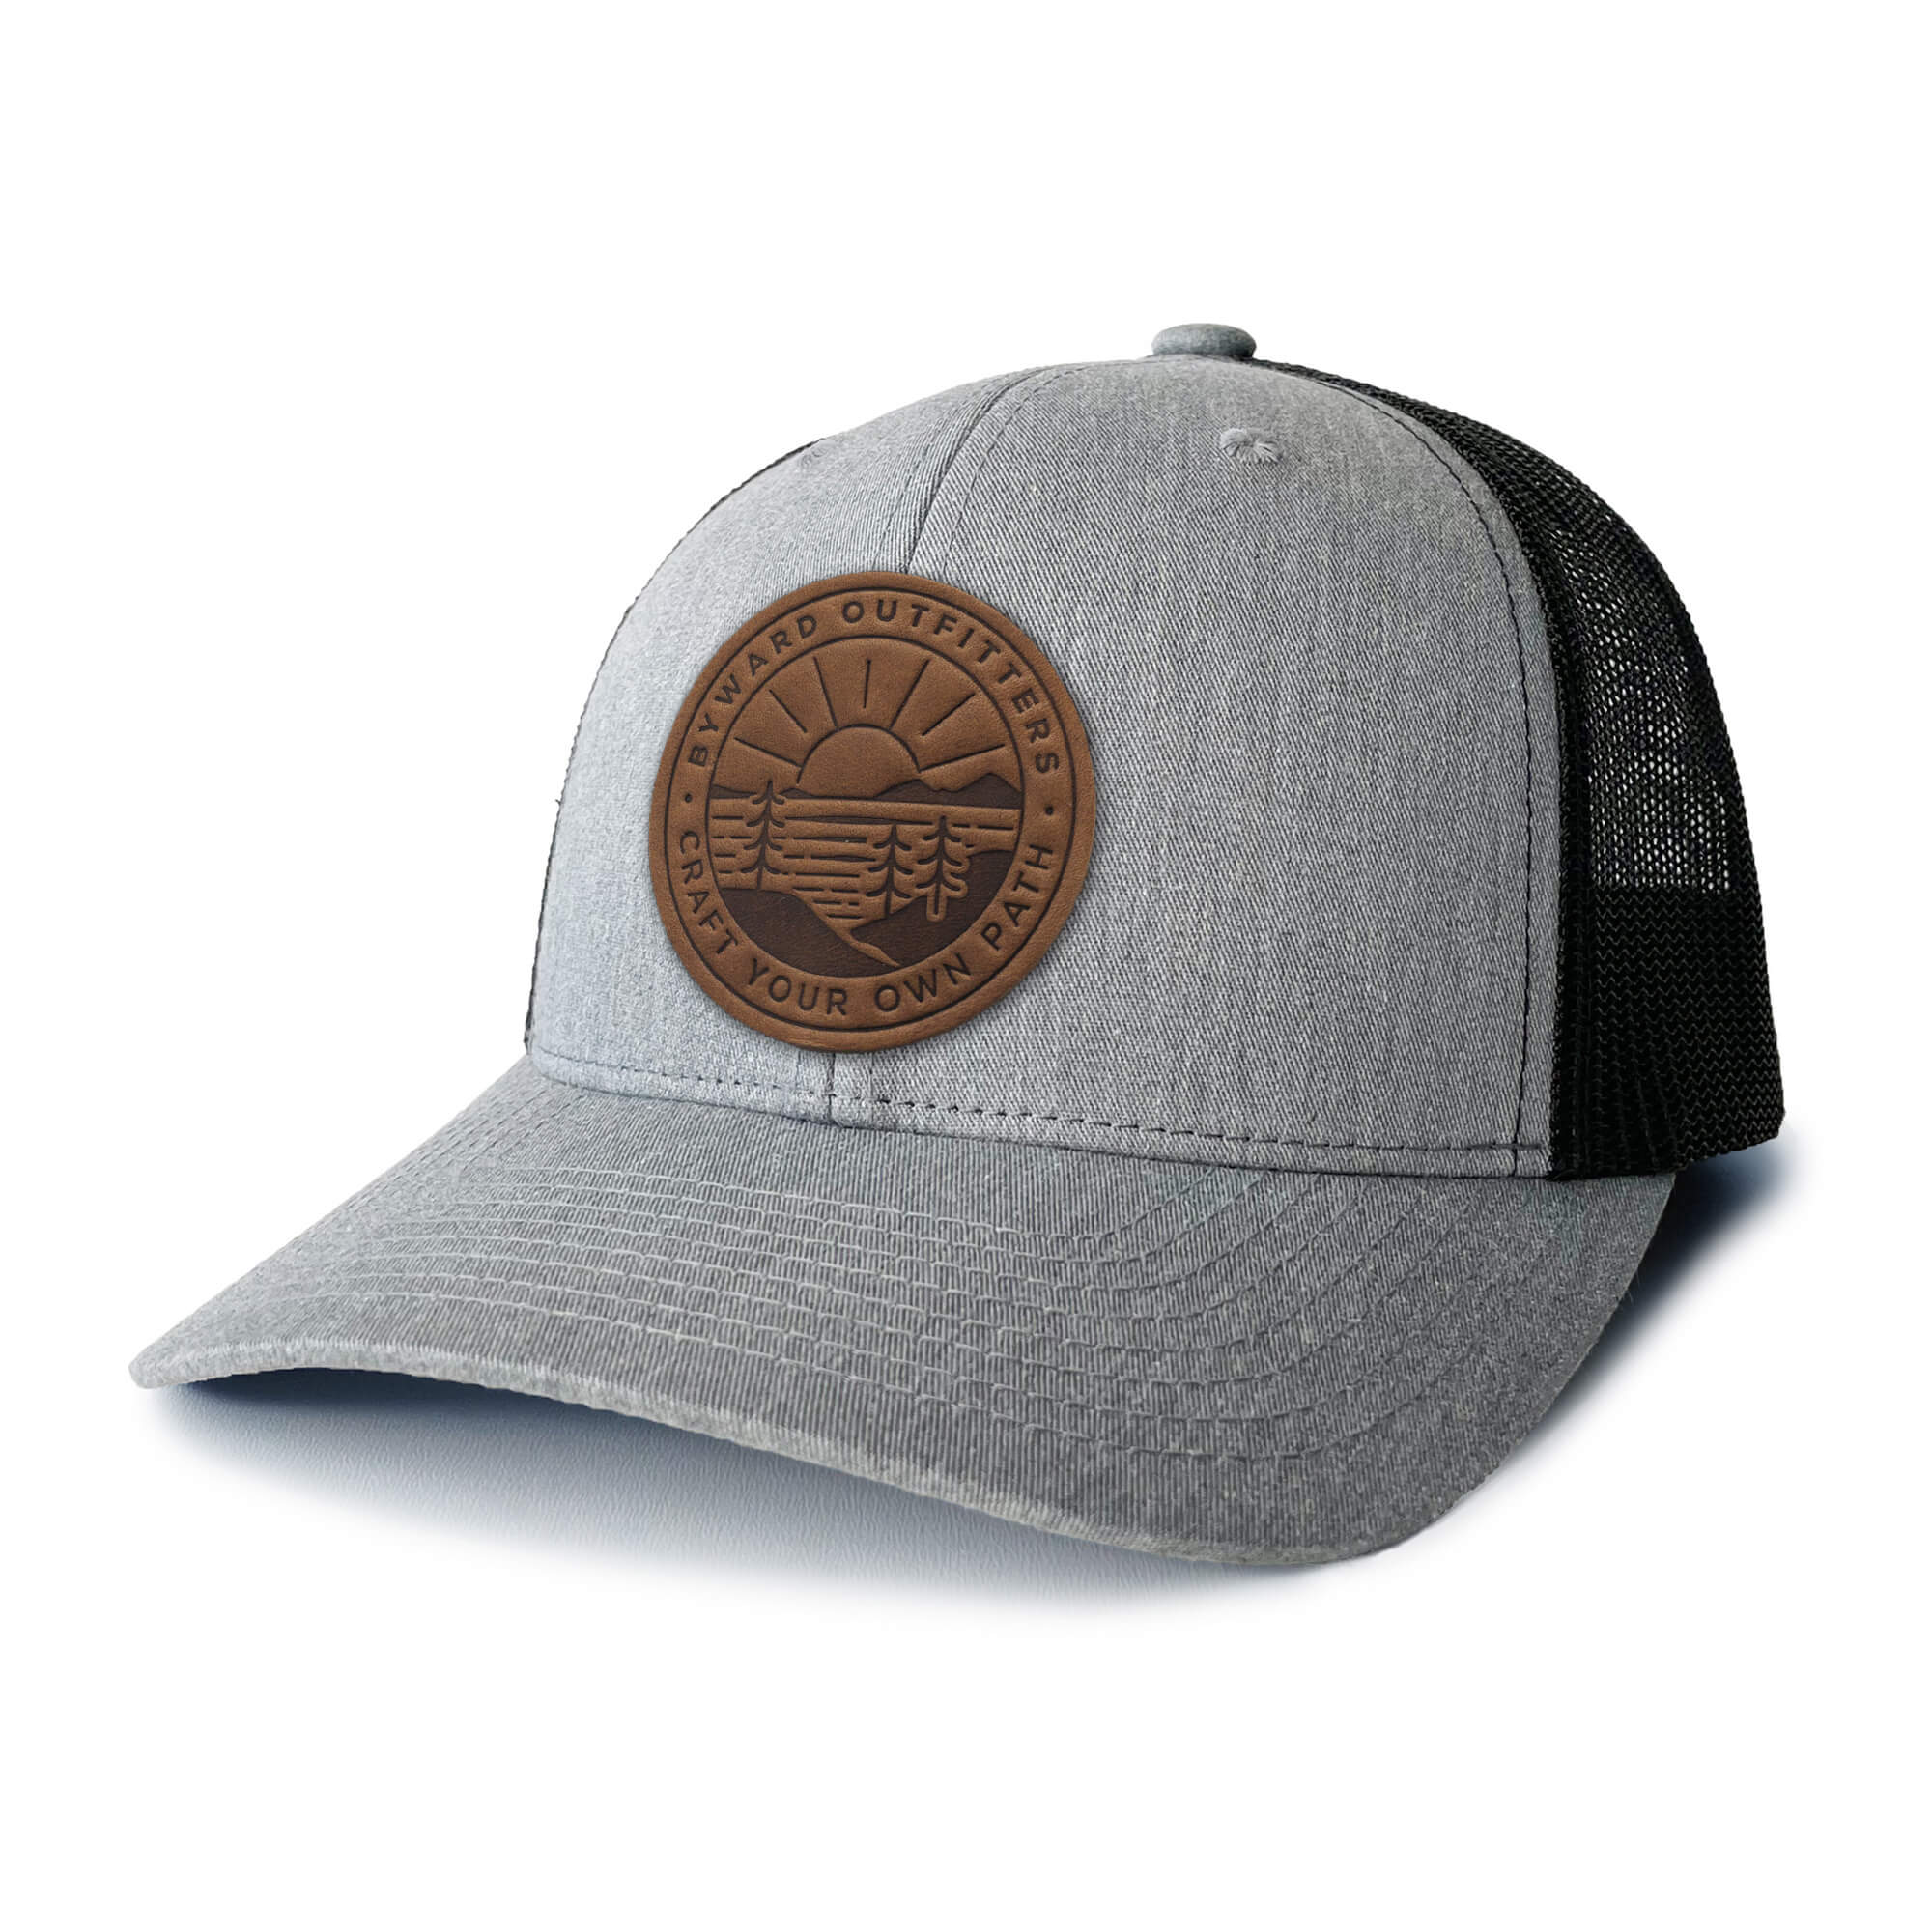 Heather Grey and white trucker hat with full-grain leather patch of Scenic Sunrise | BLACK-005-002, CHARC-005-002, NAVY-005-002, HGREY-005-002, MOSS-005-002, BROWN-005-002